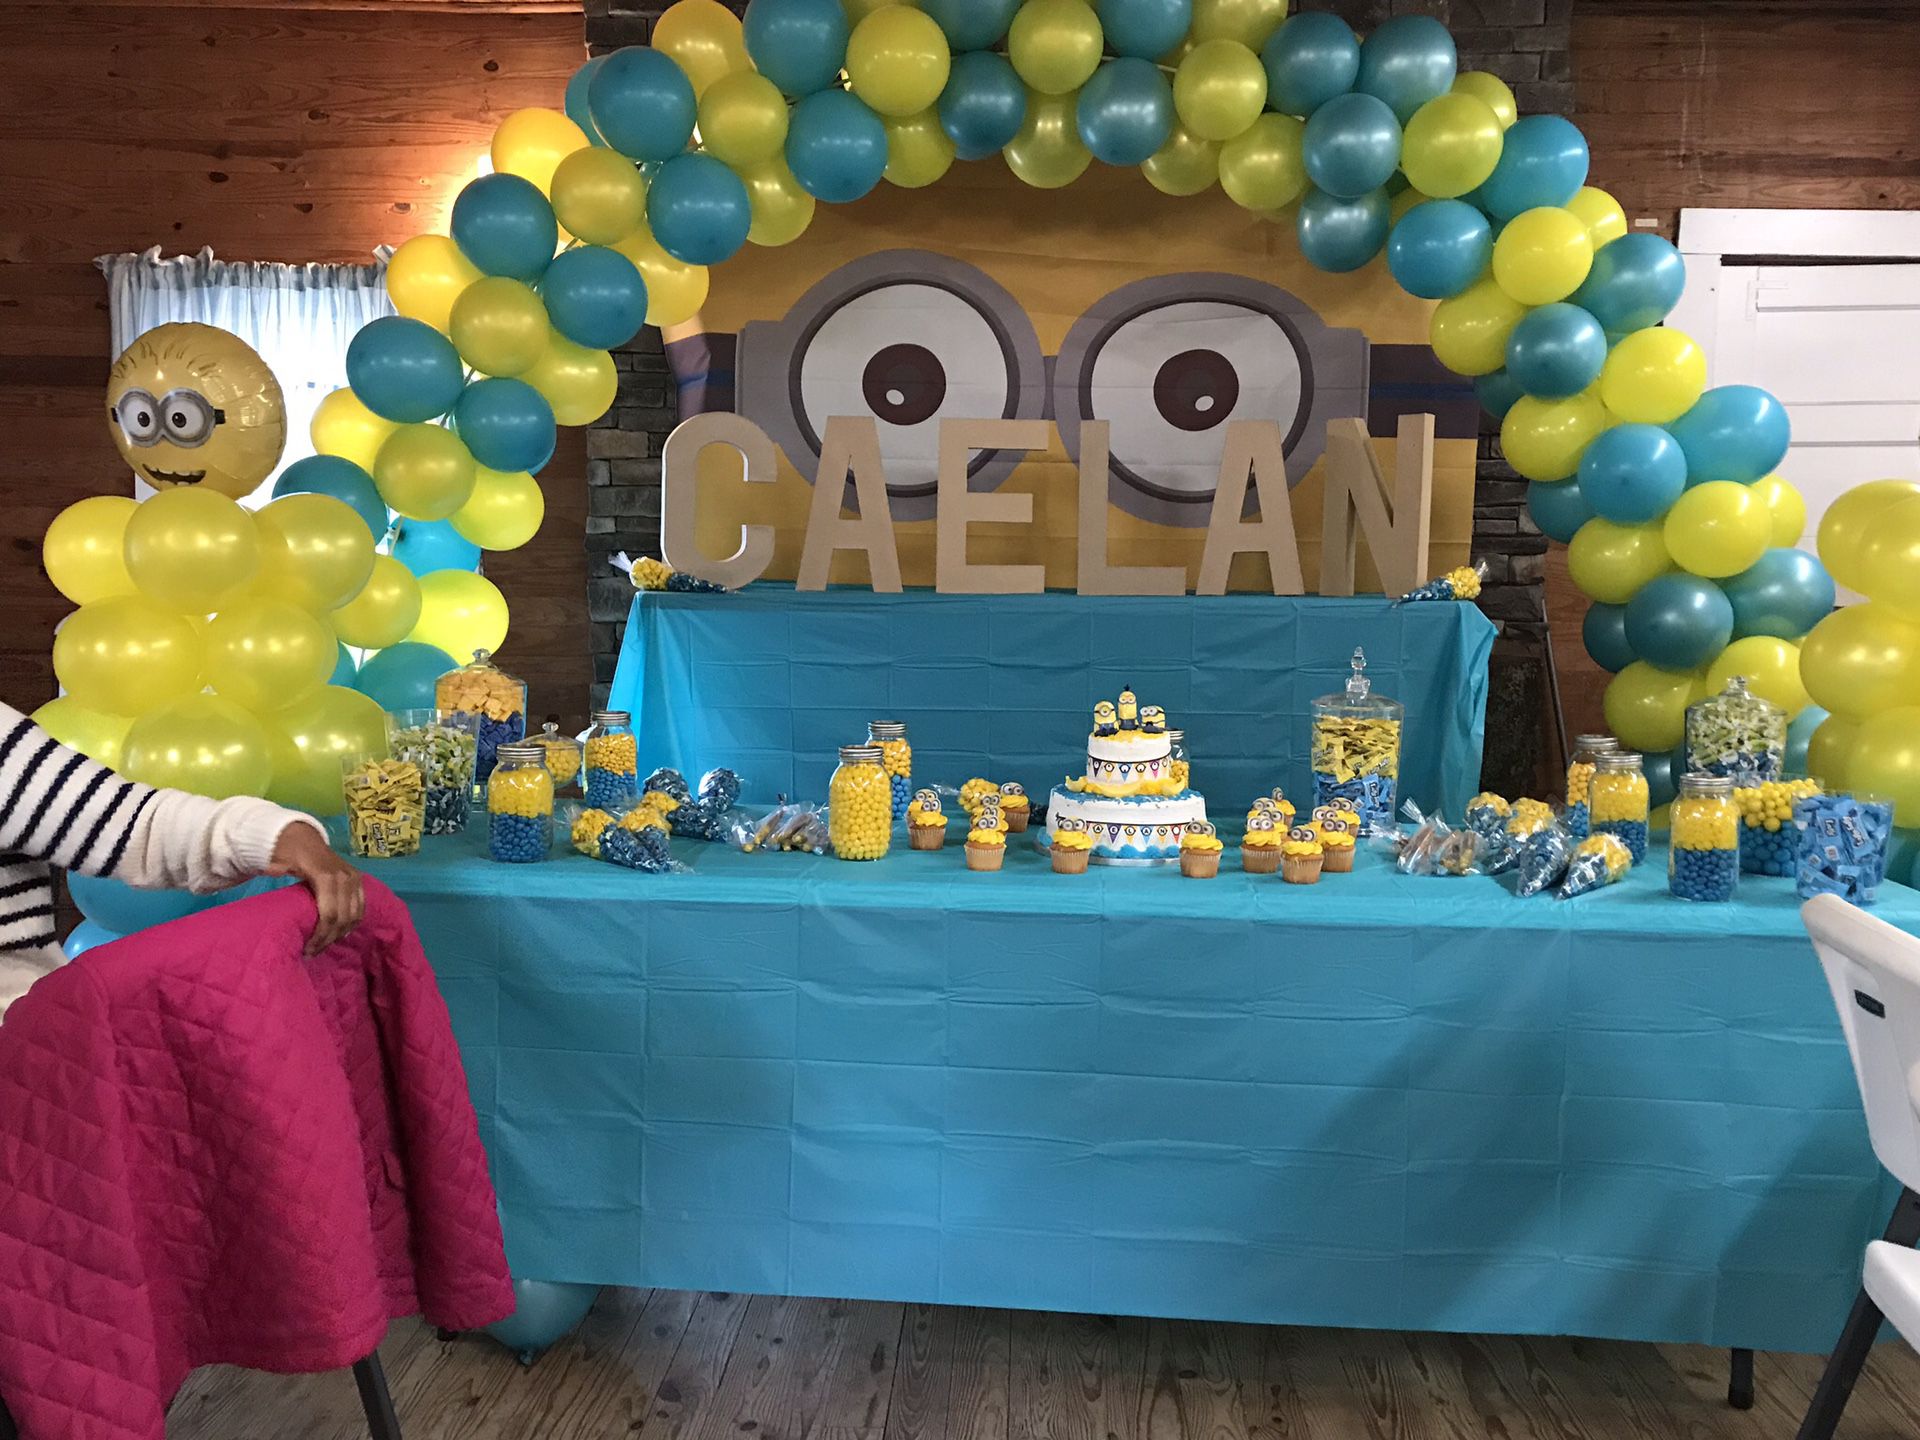 Balloon Arches and decorations for parties